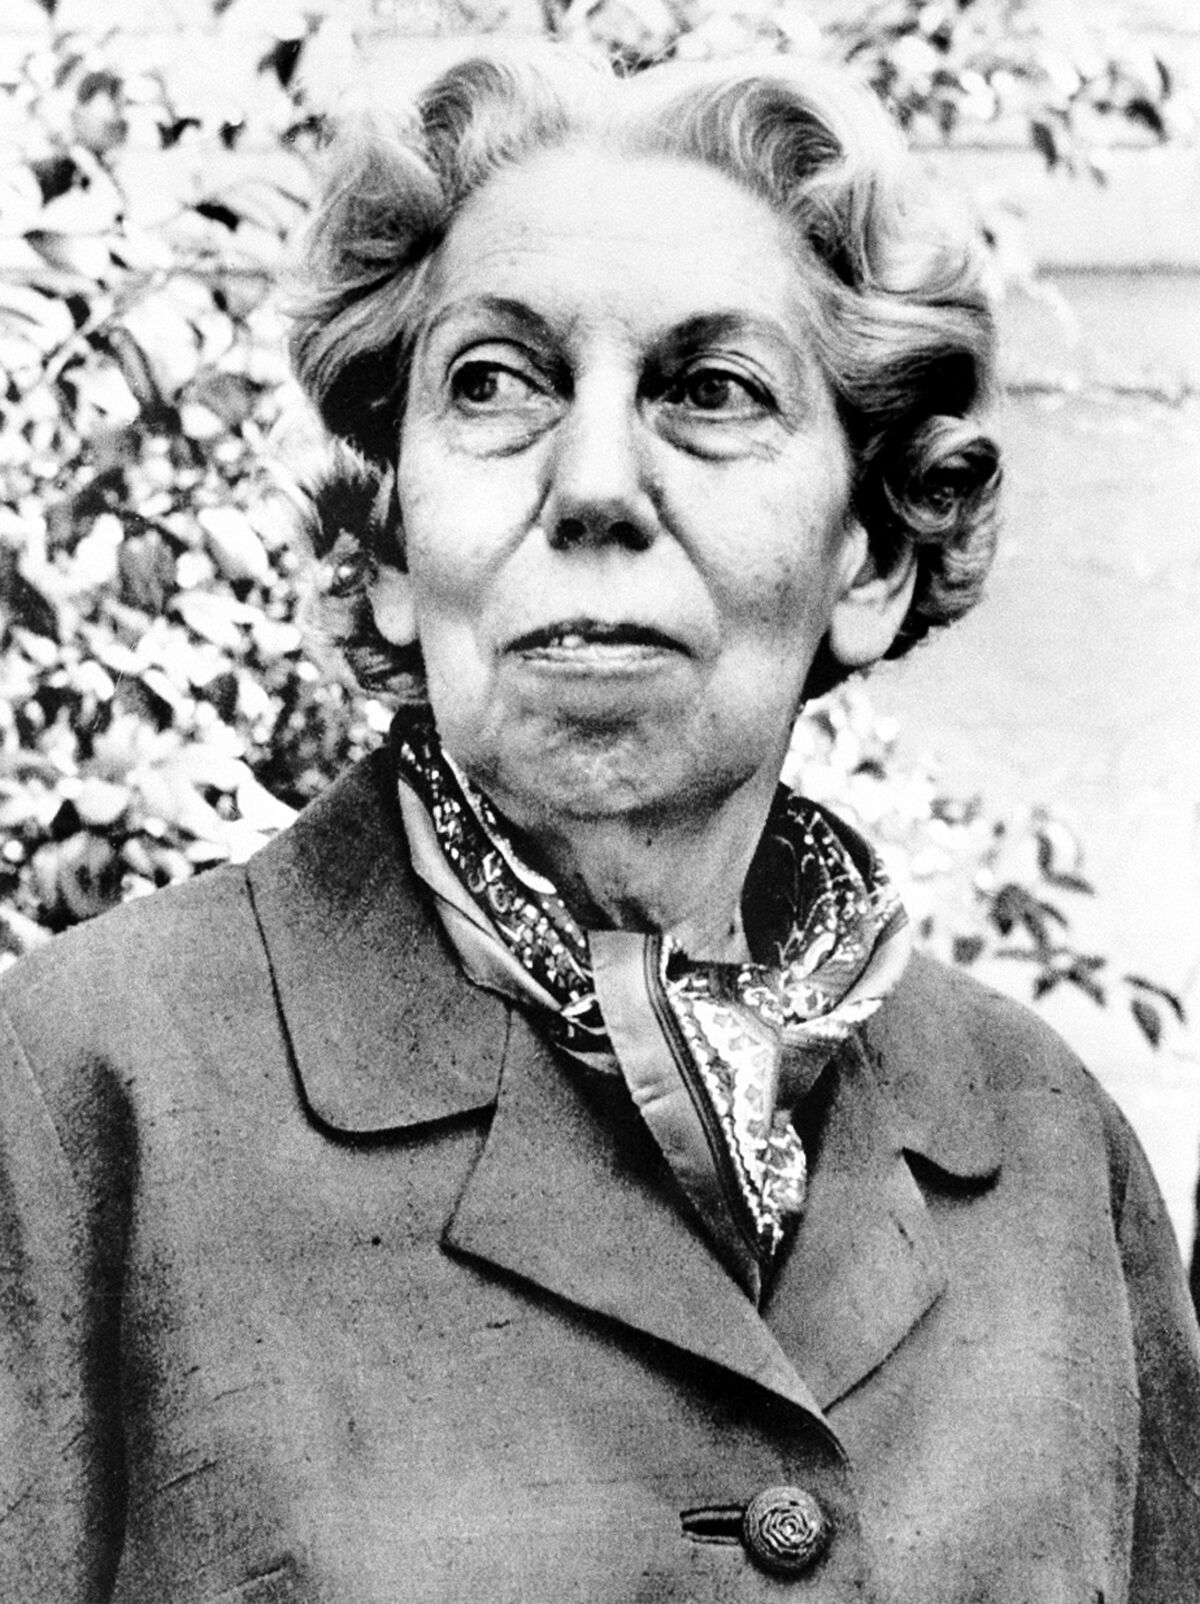 Author Eudora Welty, of Jackson, Miss., is shown in 1972 at an unknown location. The Mississippi Department of Archives and History announced that on April 13, 2022, the 113th anniversary of Welty’s birth, it was allowing the public to have access to Welty family letters that she had donated to the department before her death in 2001. Her will specified the letters were to remain private for 20 years after her death. Welty won the 1973 Pulitzer Prize for fiction for her short novel, "The Optimist's Daughter,” which was published in 1972. (AP Photo)